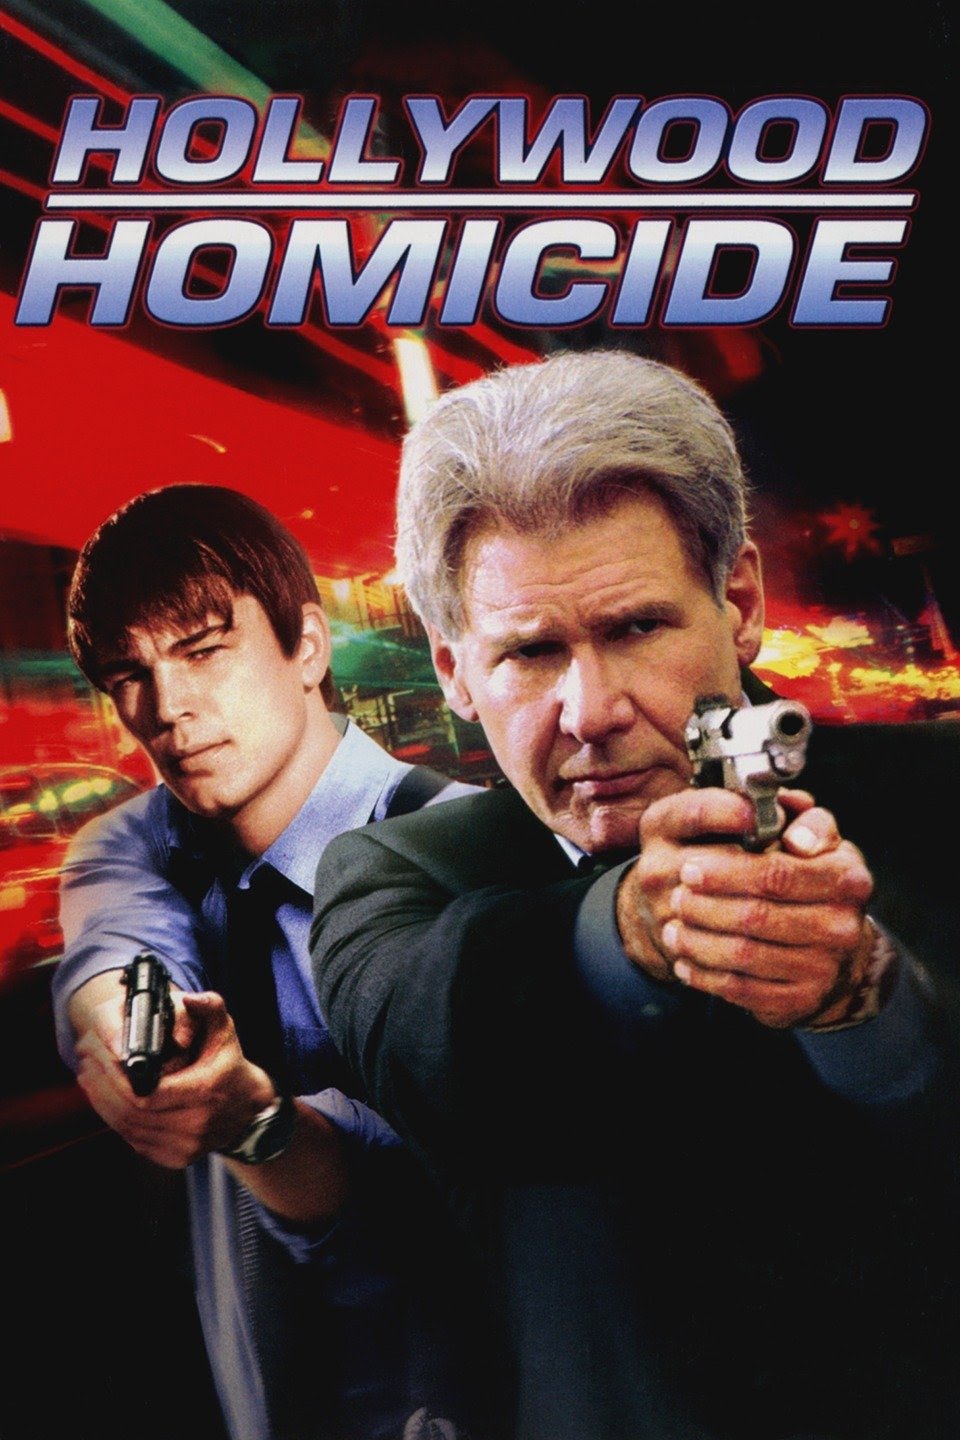 Hollywood Homicide [HD] (2003)